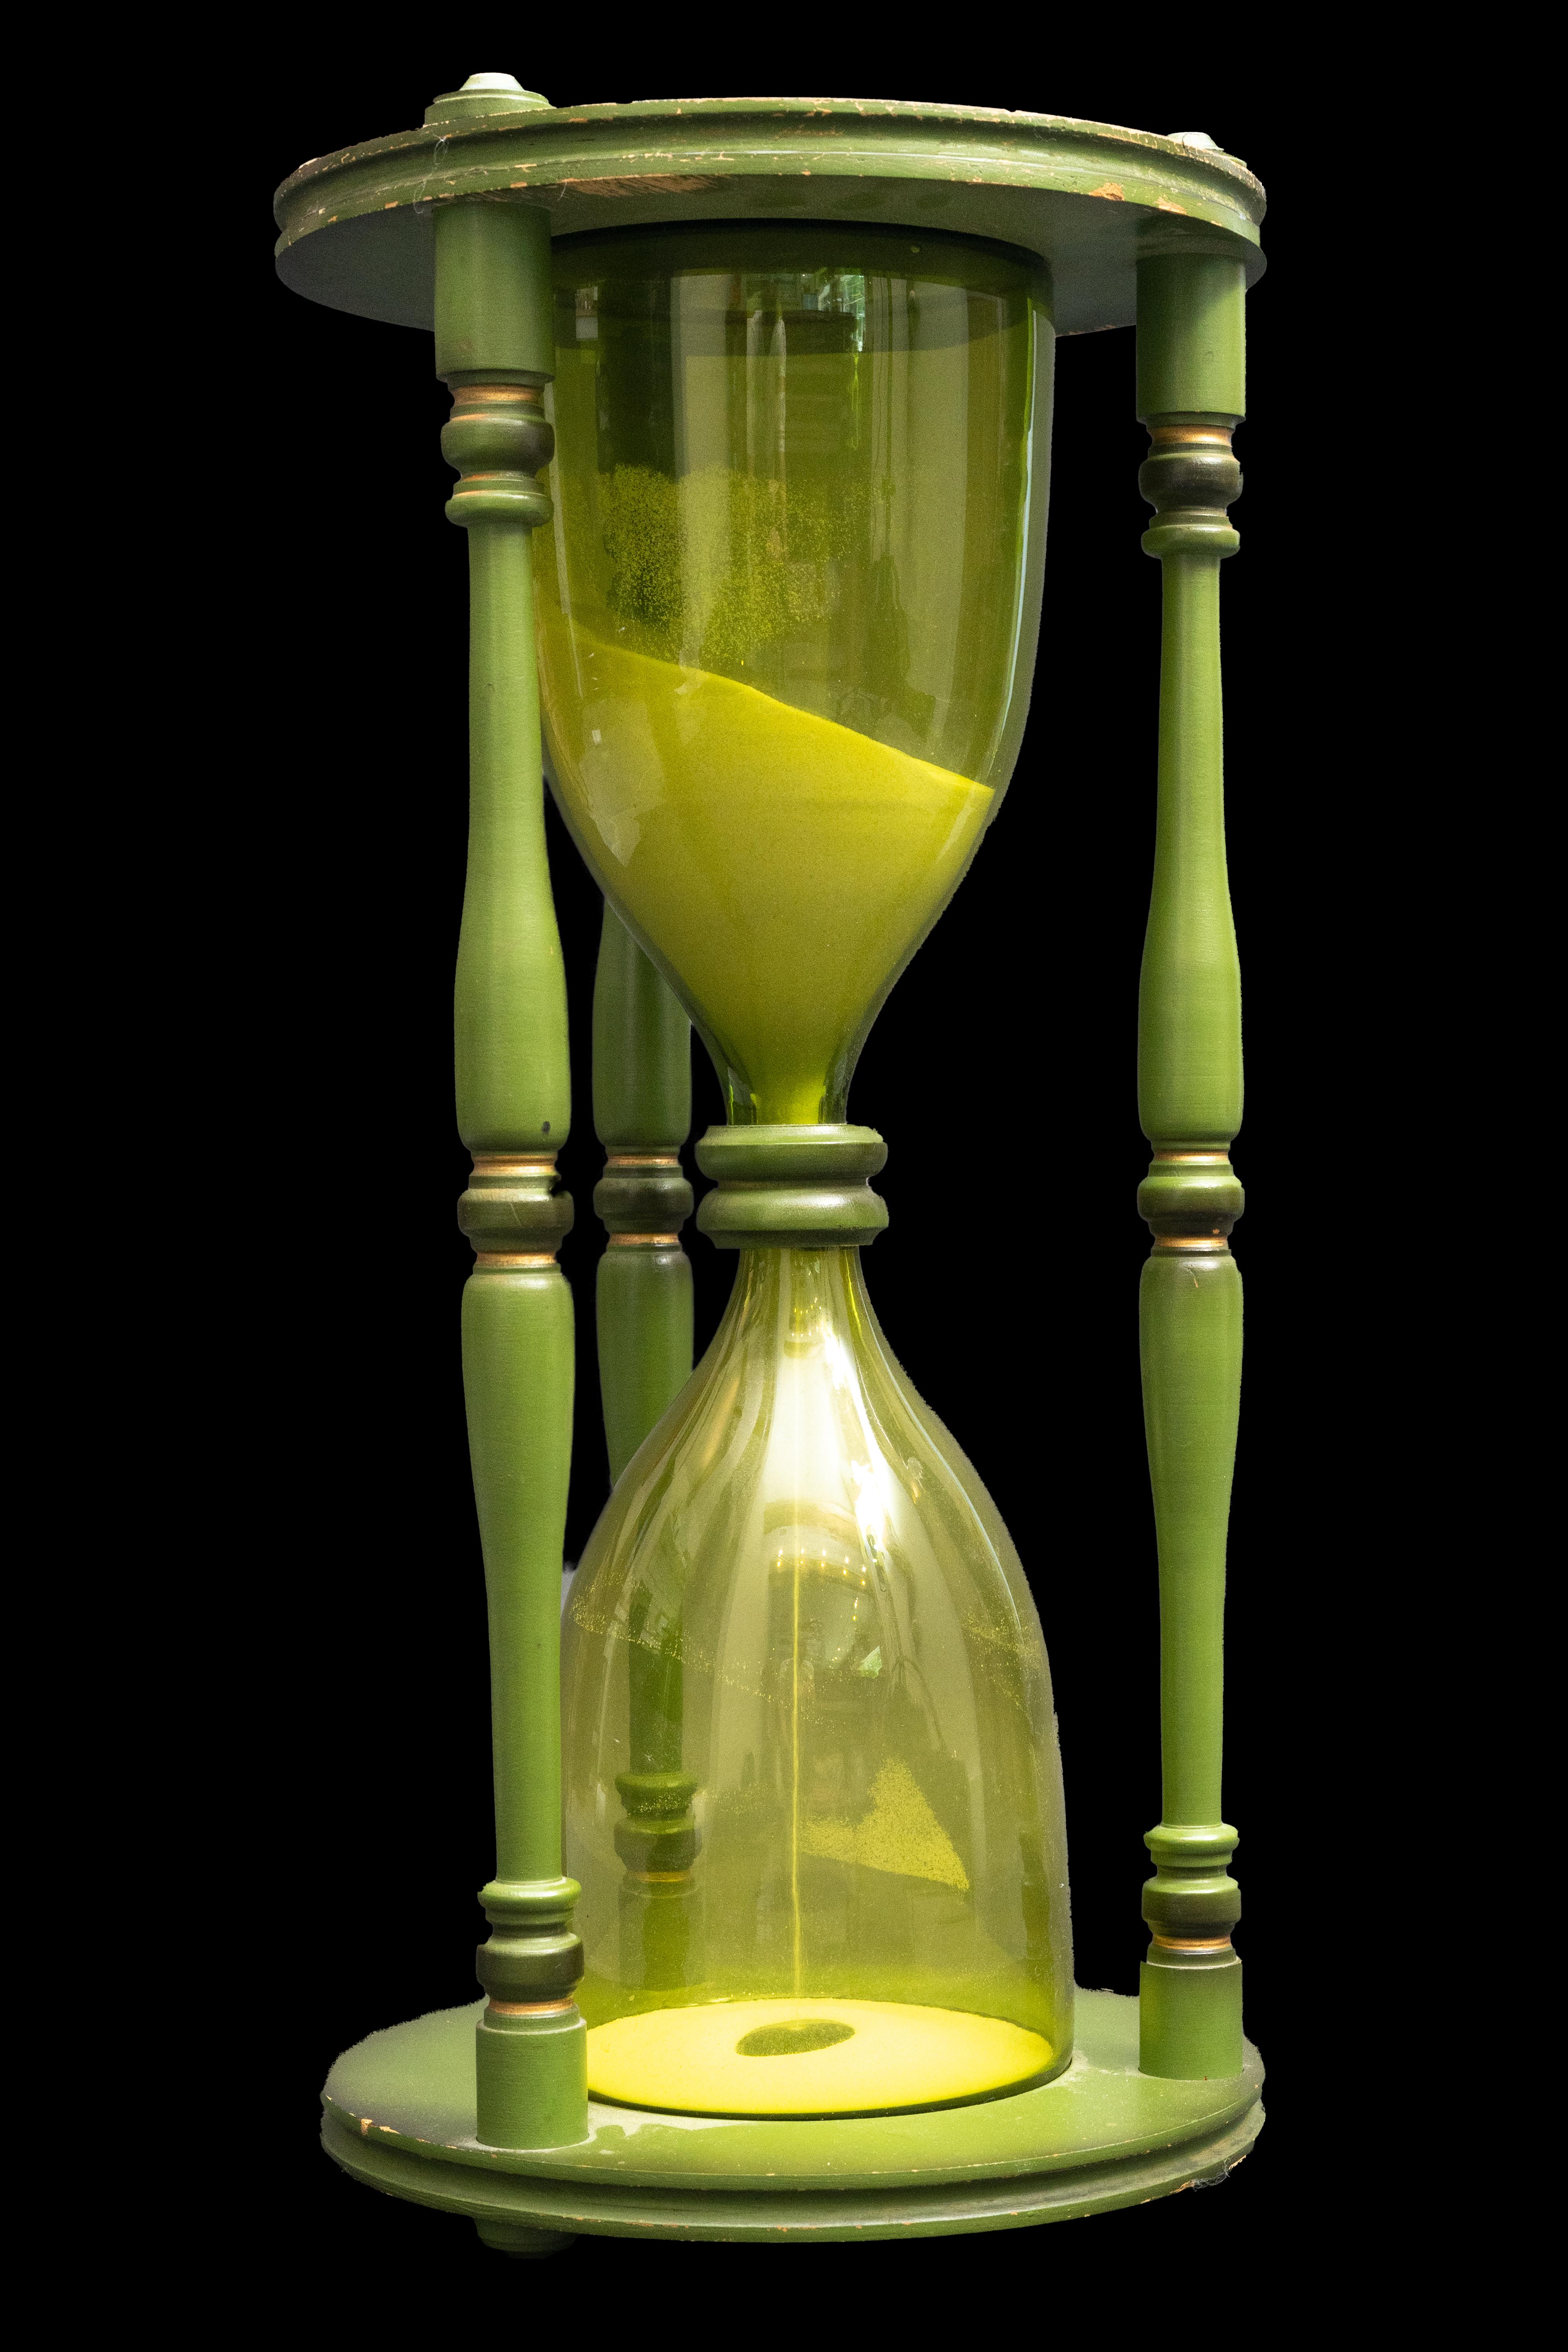 ExtraLarge Mid-Century modern green hourglass

Measures 11.5